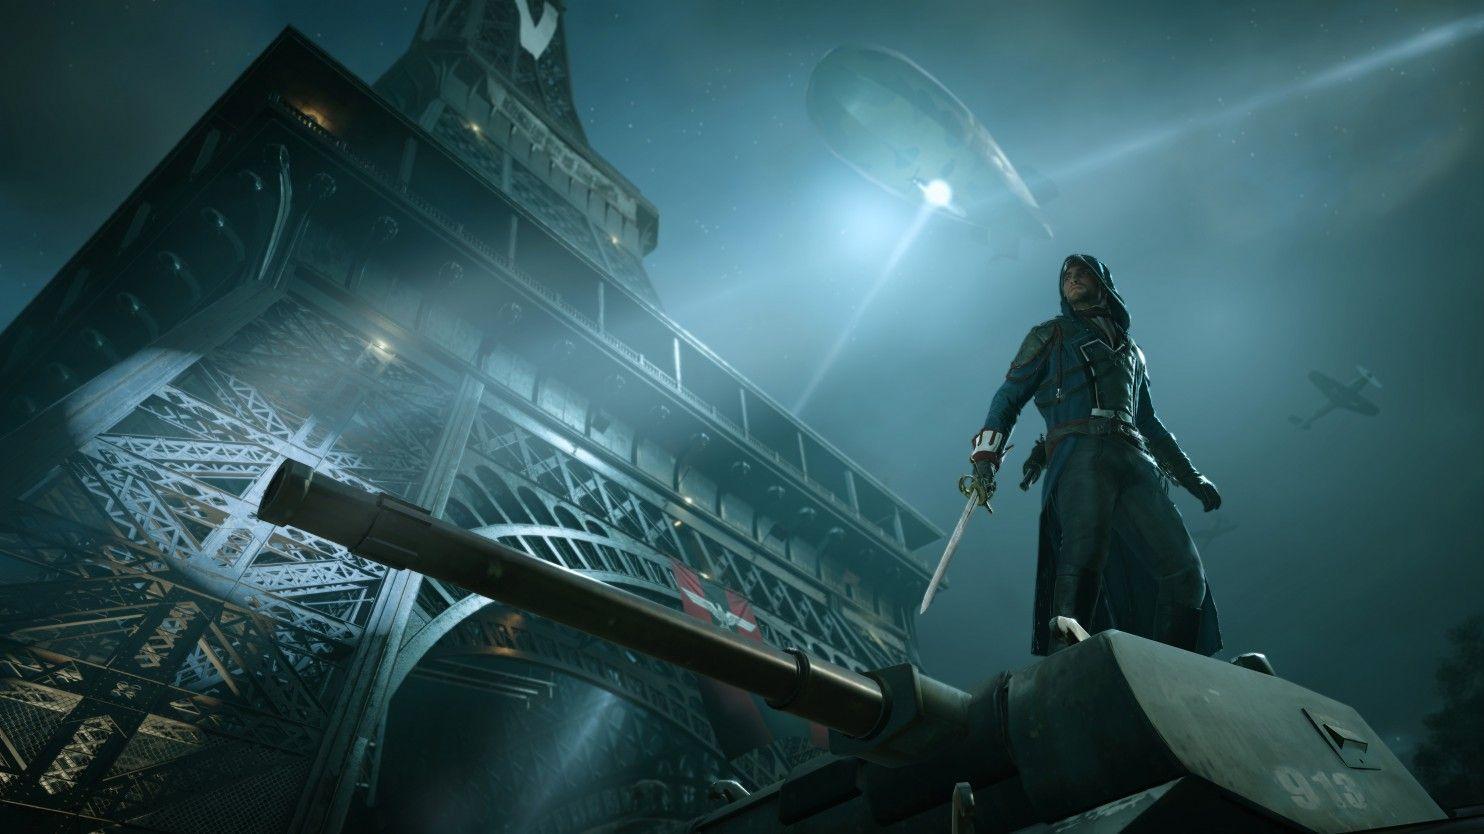 Assassin's Creed: Unity is a game that can barely hold itself